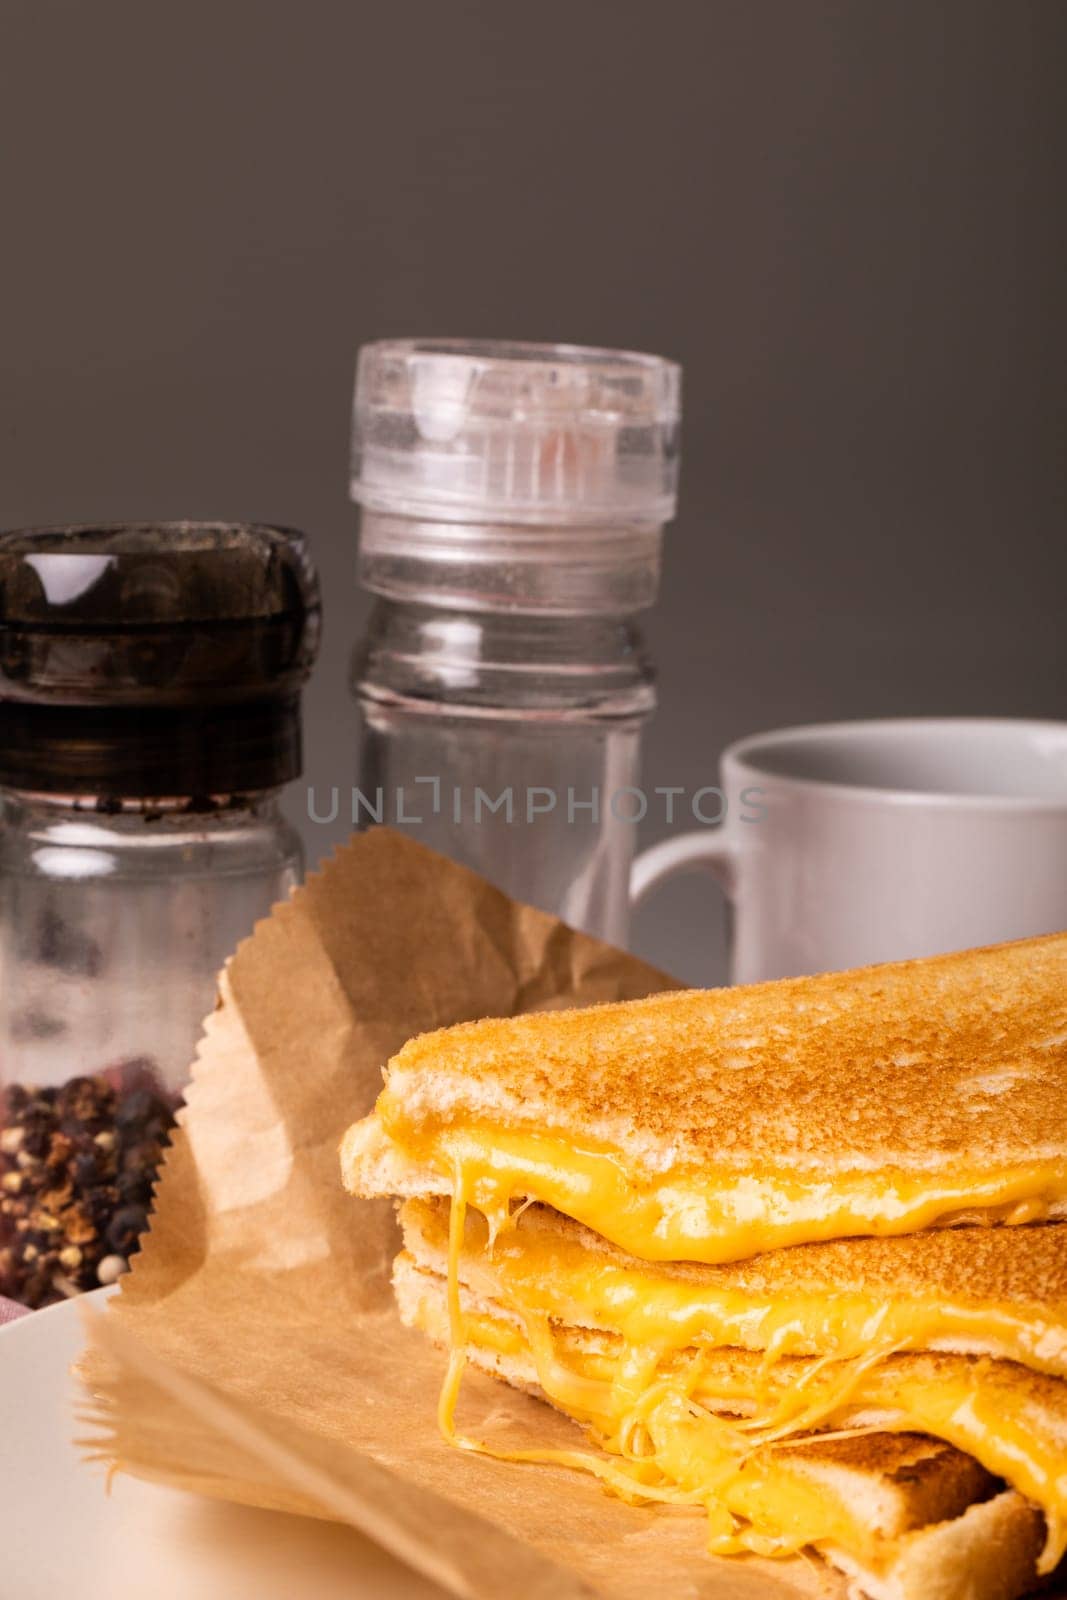 Close-up of fresh cheese sandwich on wax paper by peppercorn bottle and cup against gray background by Wavebreakmedia